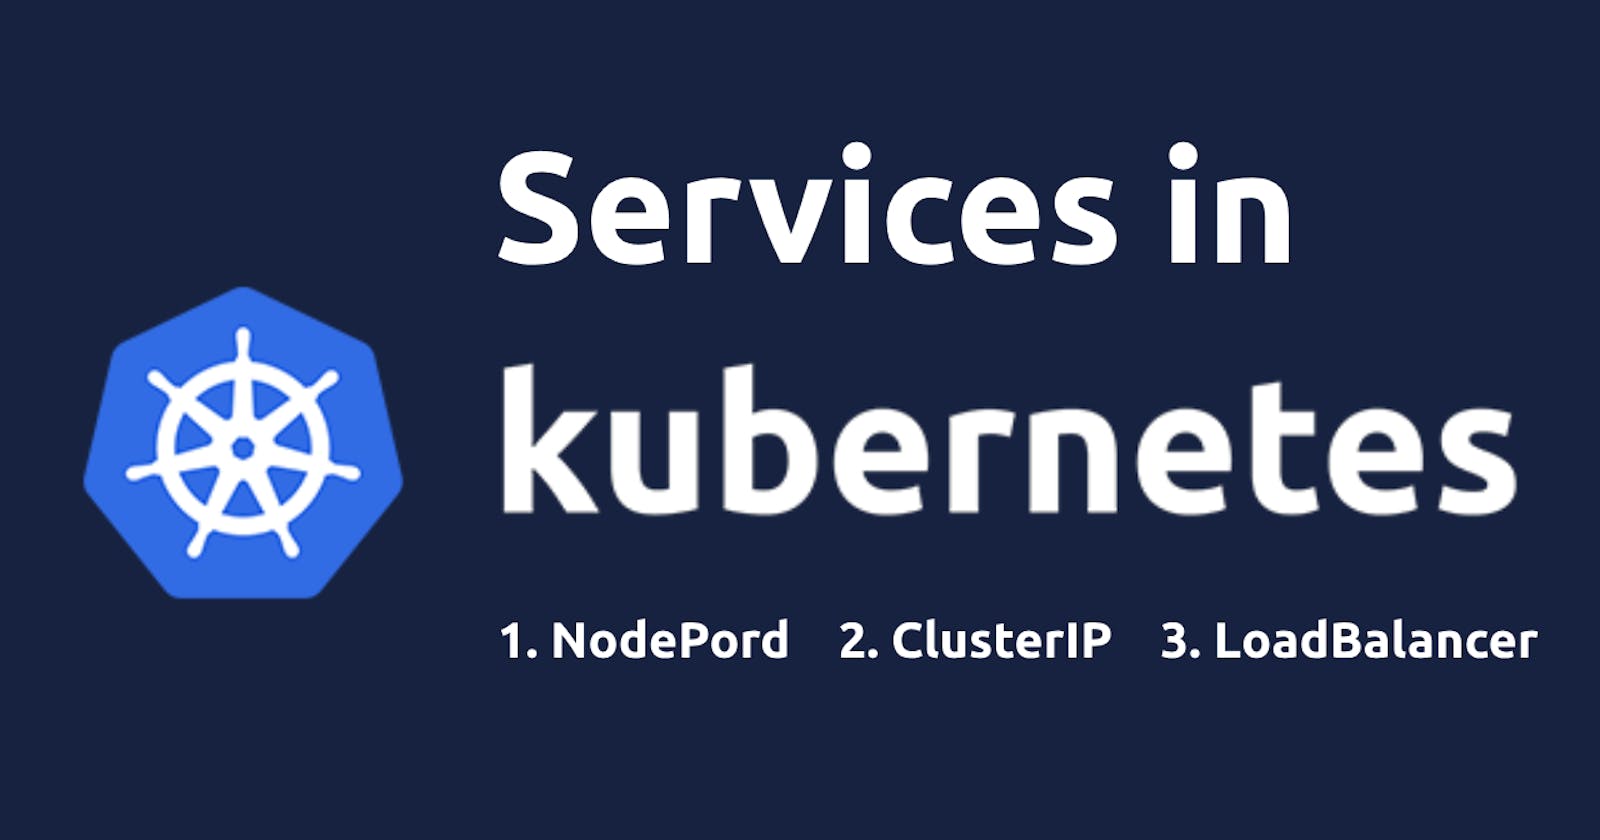 Services in Kubernetes